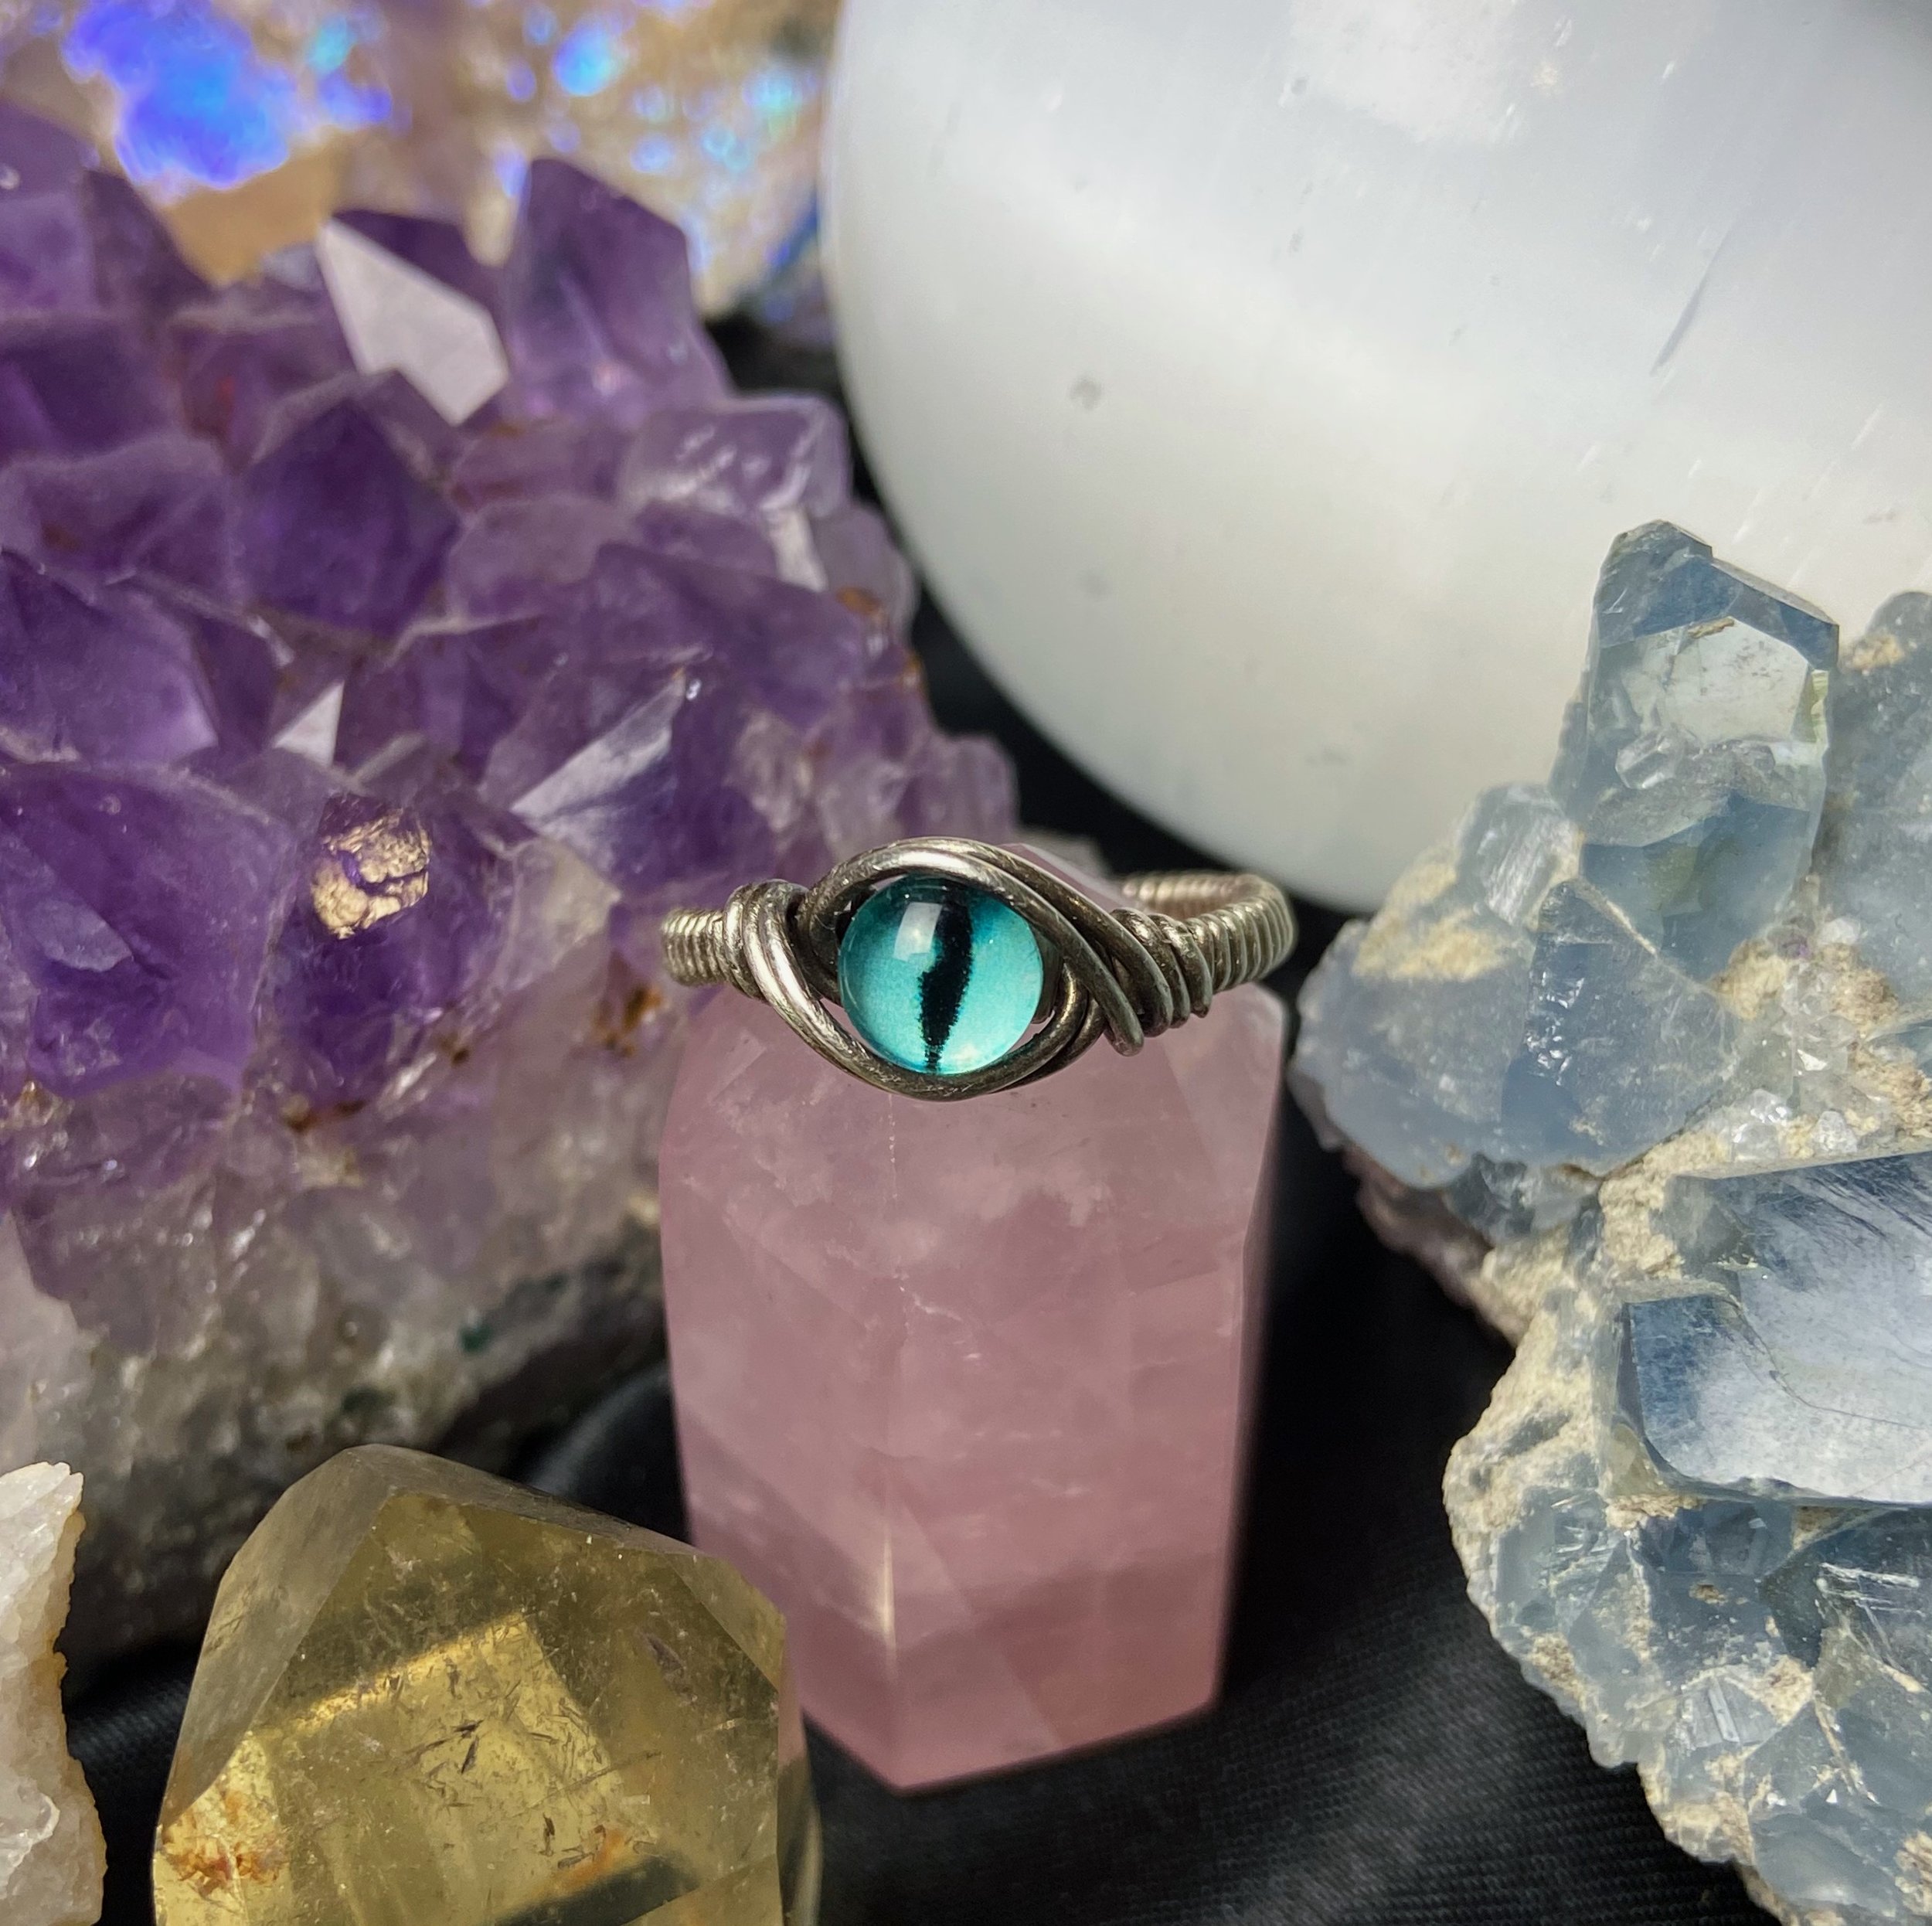 Buy Cats Eye Ring Online In India - Etsy India